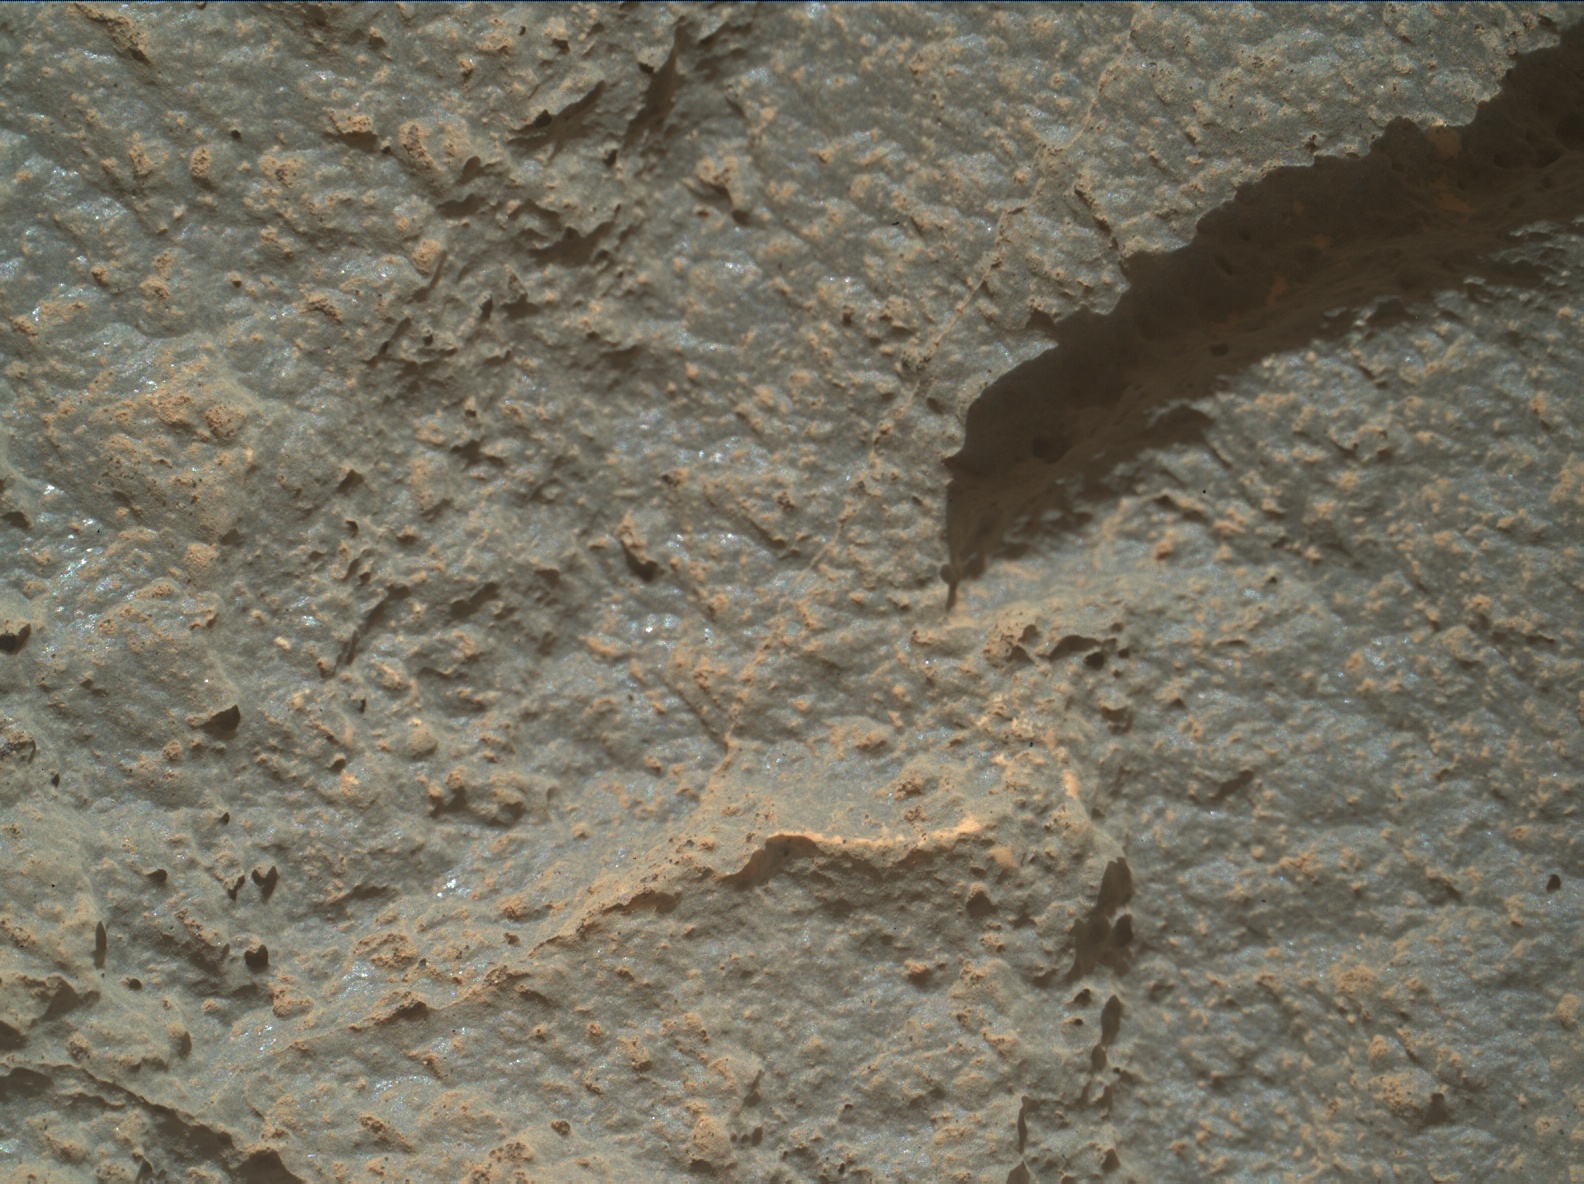 Nasa's Mars rover Curiosity acquired this image using its Mars Hand Lens Imager (MAHLI) on Sol 2632